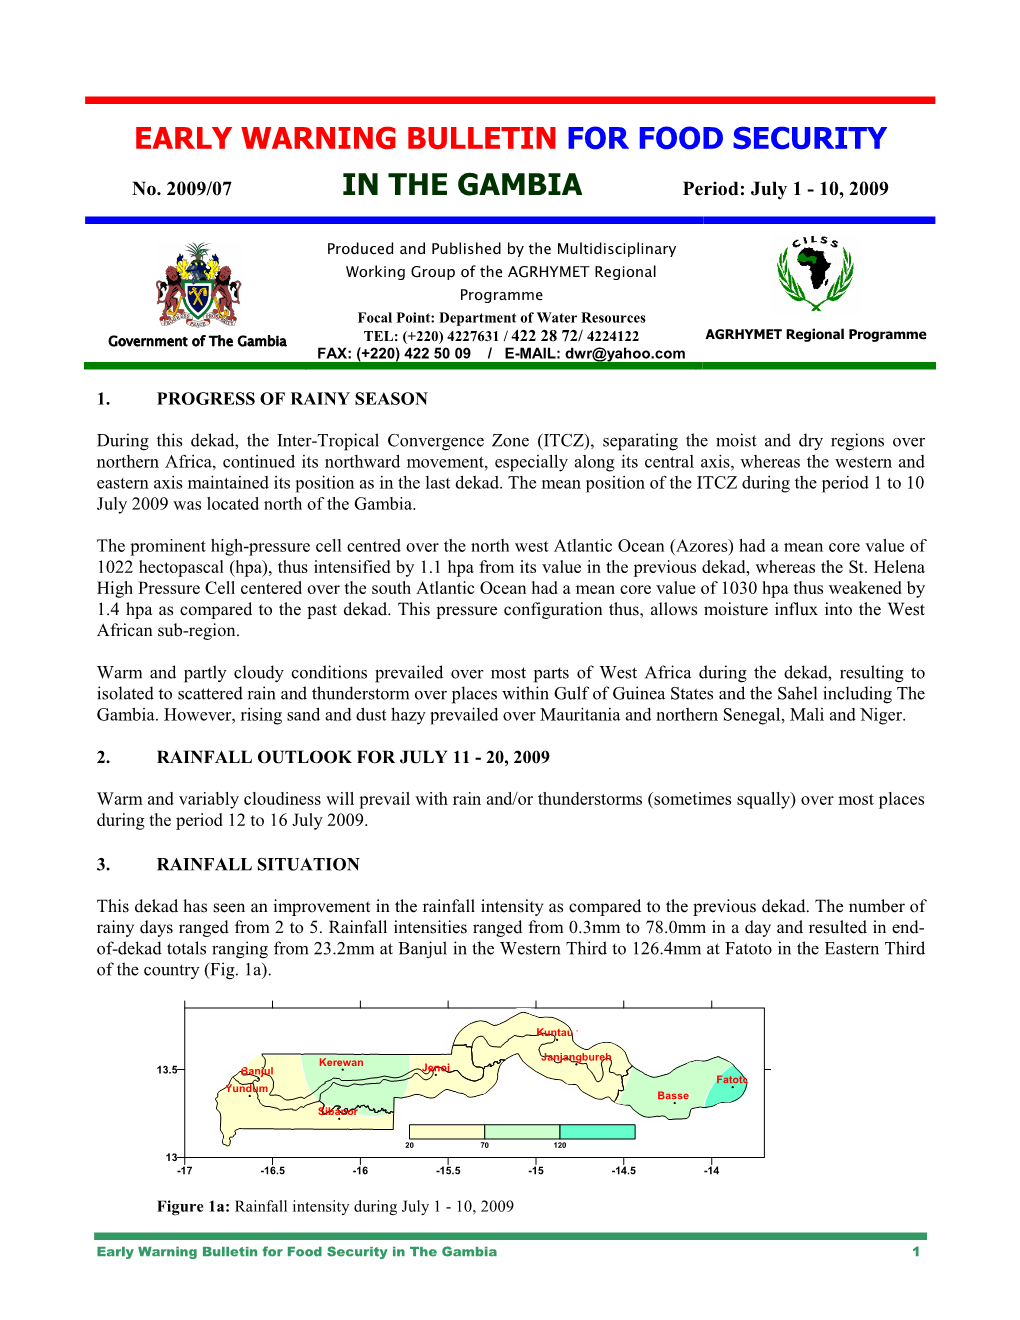 Early Warning Bulletin for Food Security in the Gambia 1